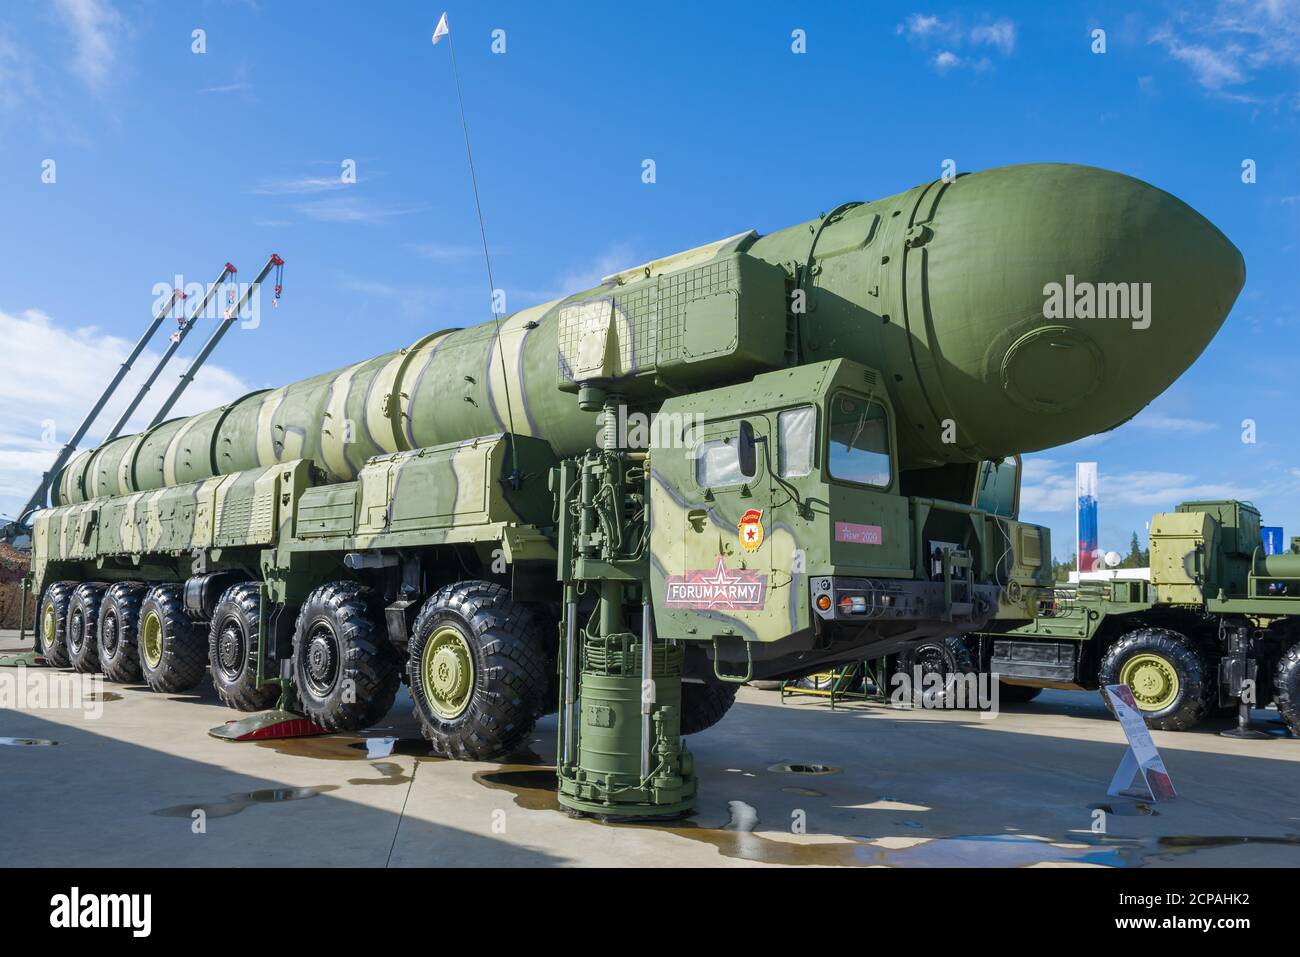 MOSCOW REGION, RUSSIA - AUGUST 27, 2020: Autonomous launcher 15U168 of the Soviet mobile strategic missile complex 15P158 'Topol' at the international Stock Photo